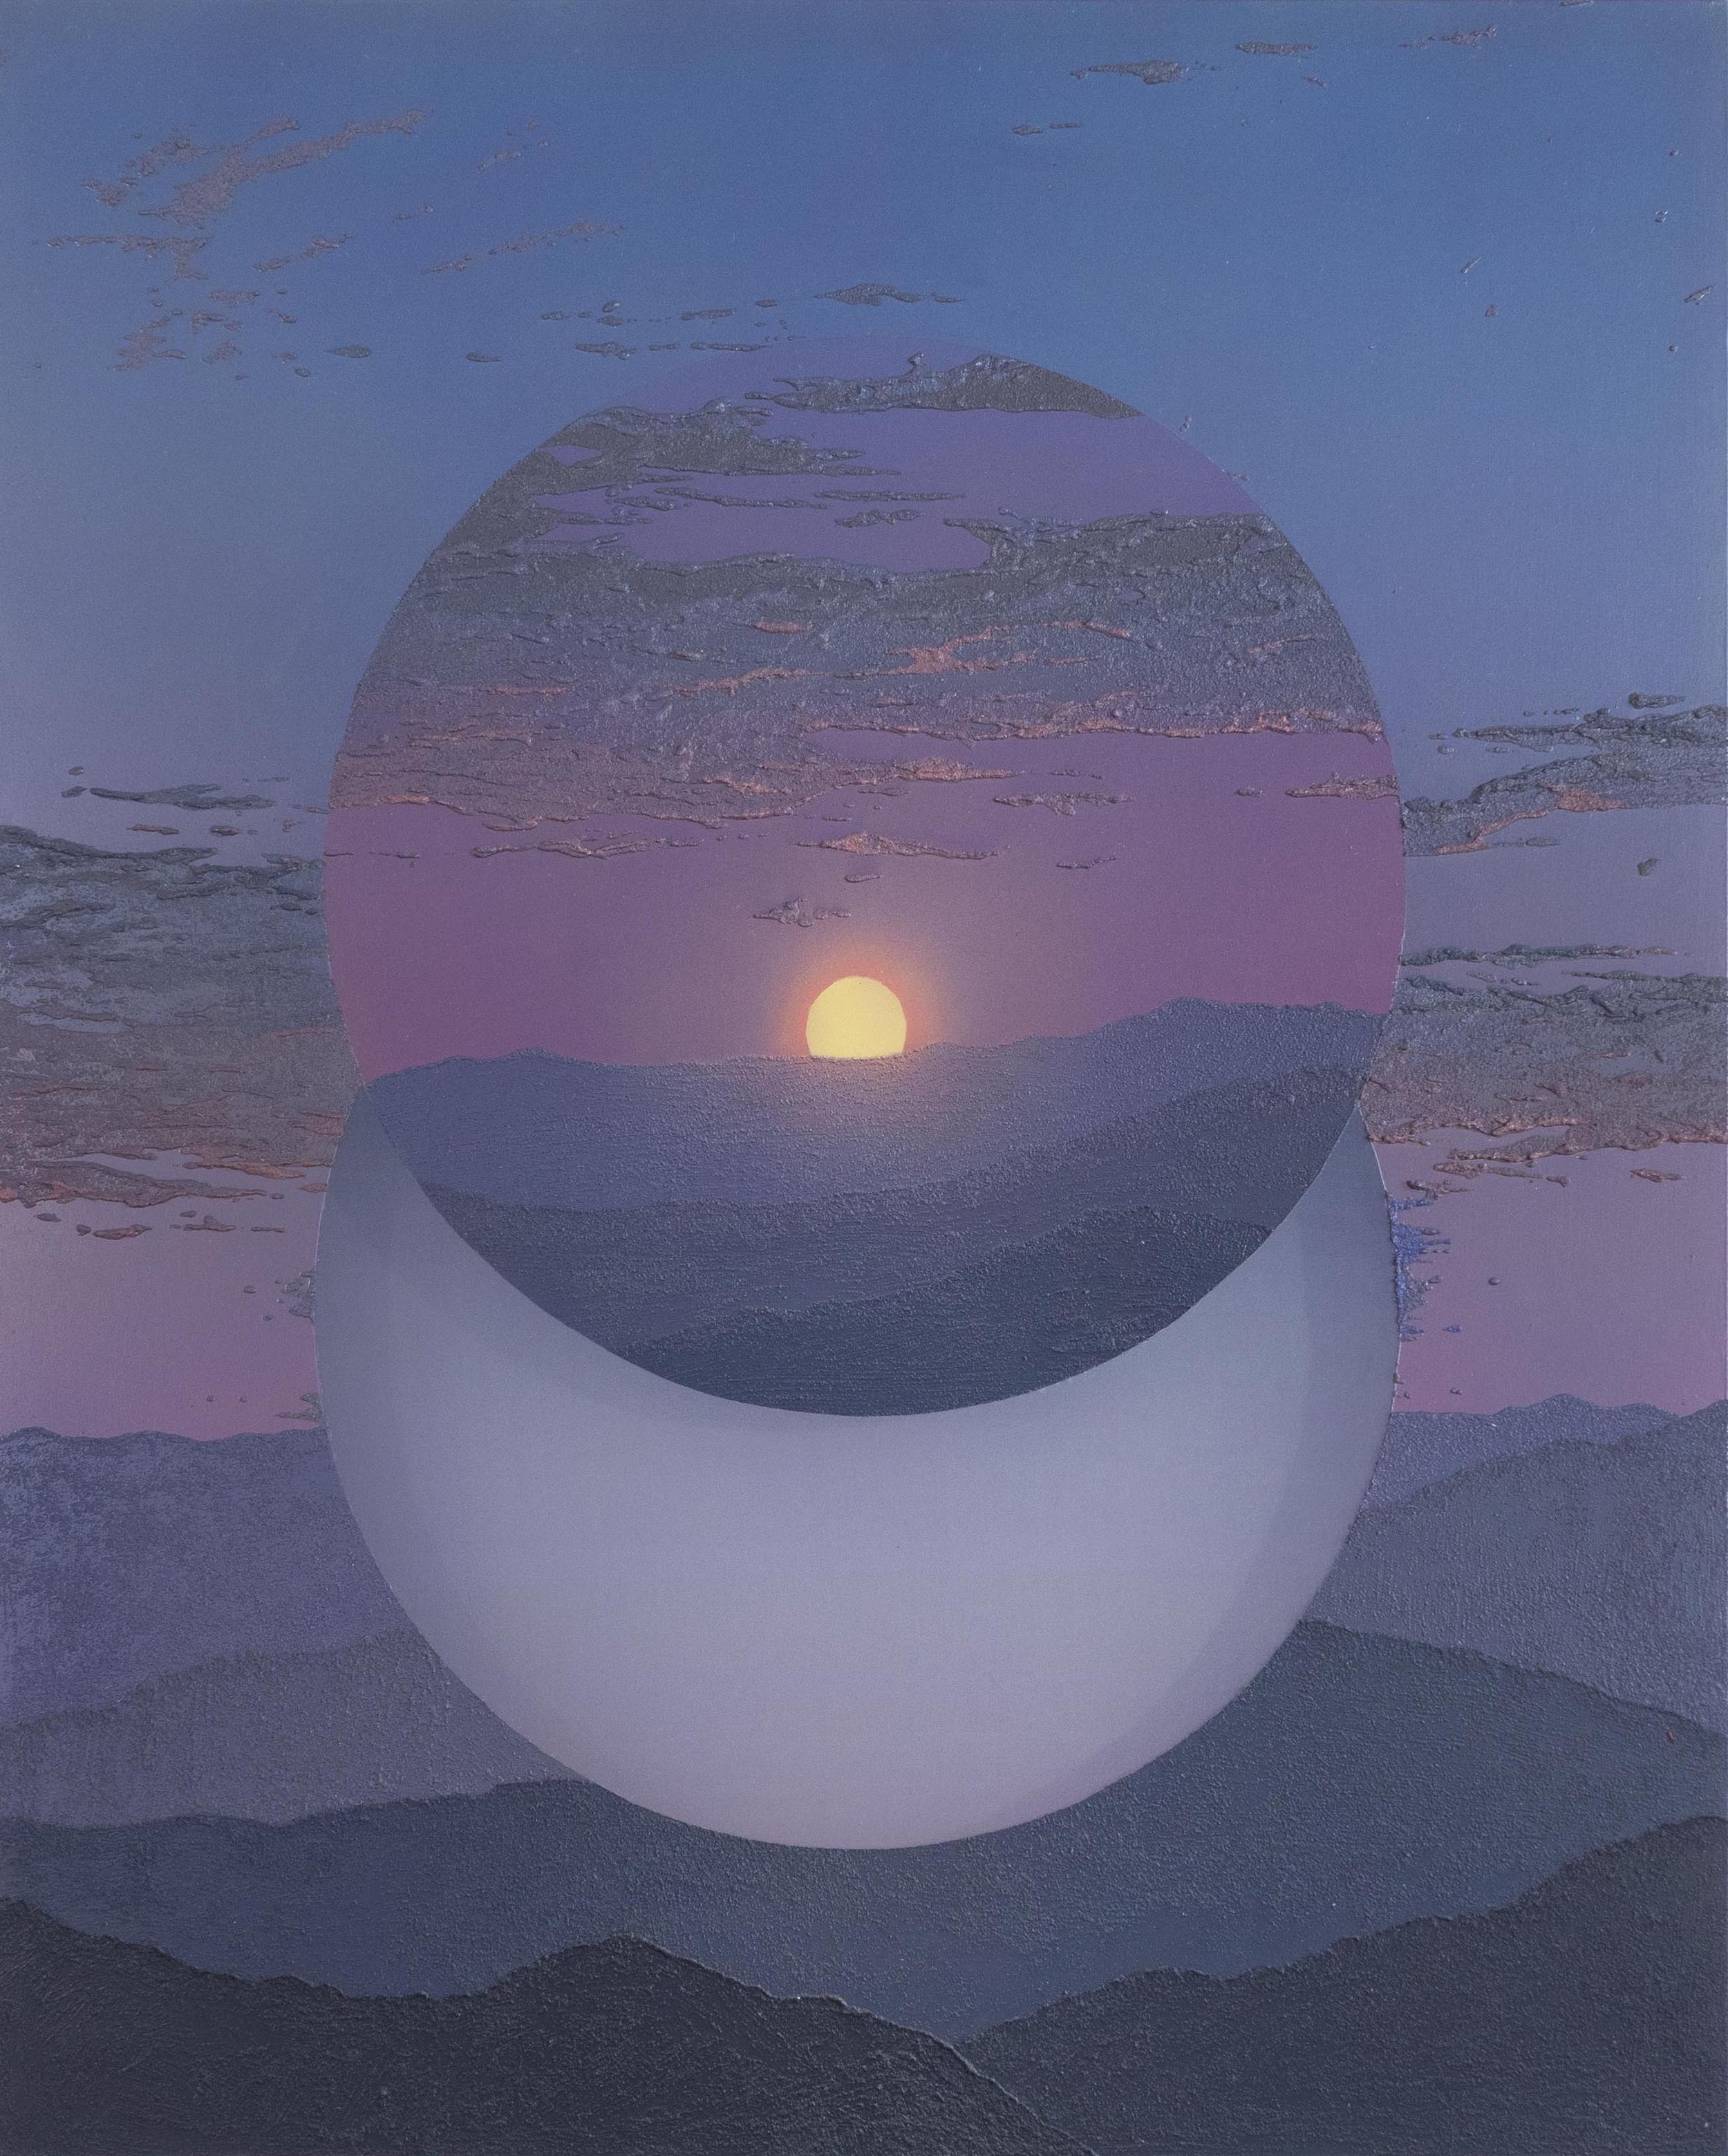 NEW MEXICO (SOUTH ECLIPSE) | 39 x 31 inches / 99.1 x 78.7 cm, acrylic and sand on digitally printed chiffon, 2022